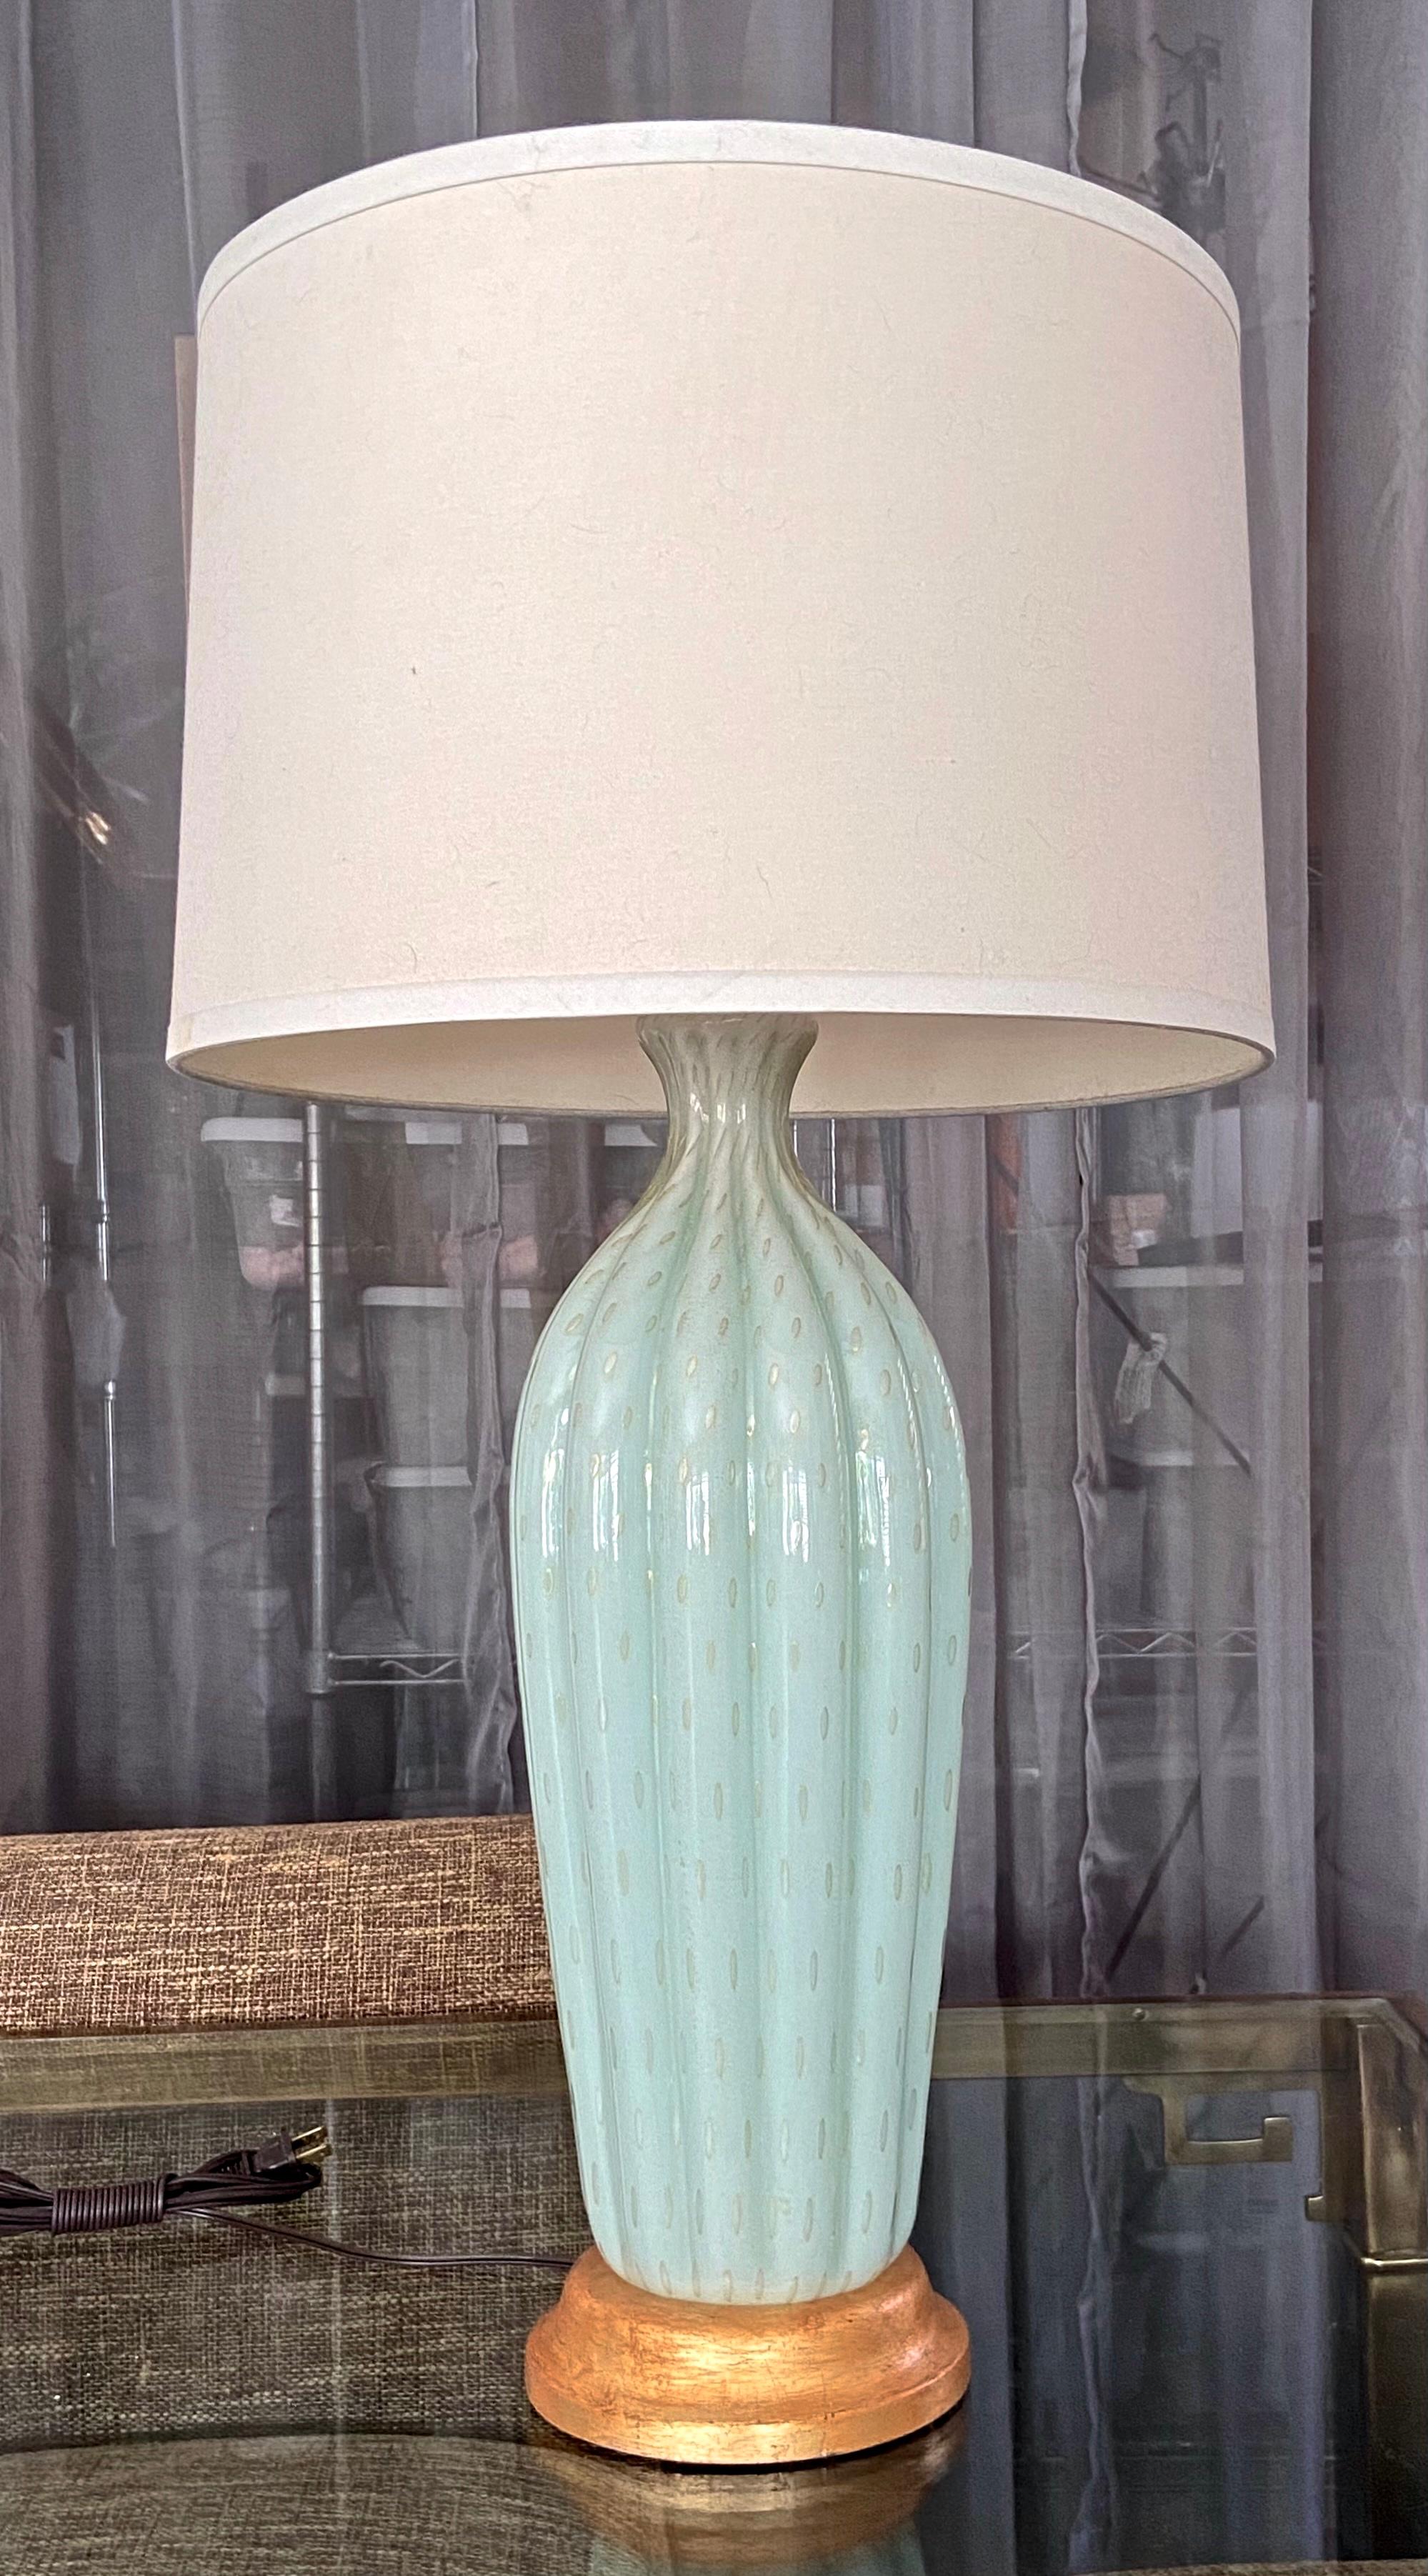 Tall Murano Italian handblown seafoam green colored glass table lamp by Alfredo Barbini. The lamp has vertical ribs with controlled gold bubbles throughout, resting on an antiqued giltwood base. Newly wired with new 3 way brass socket and fittings.